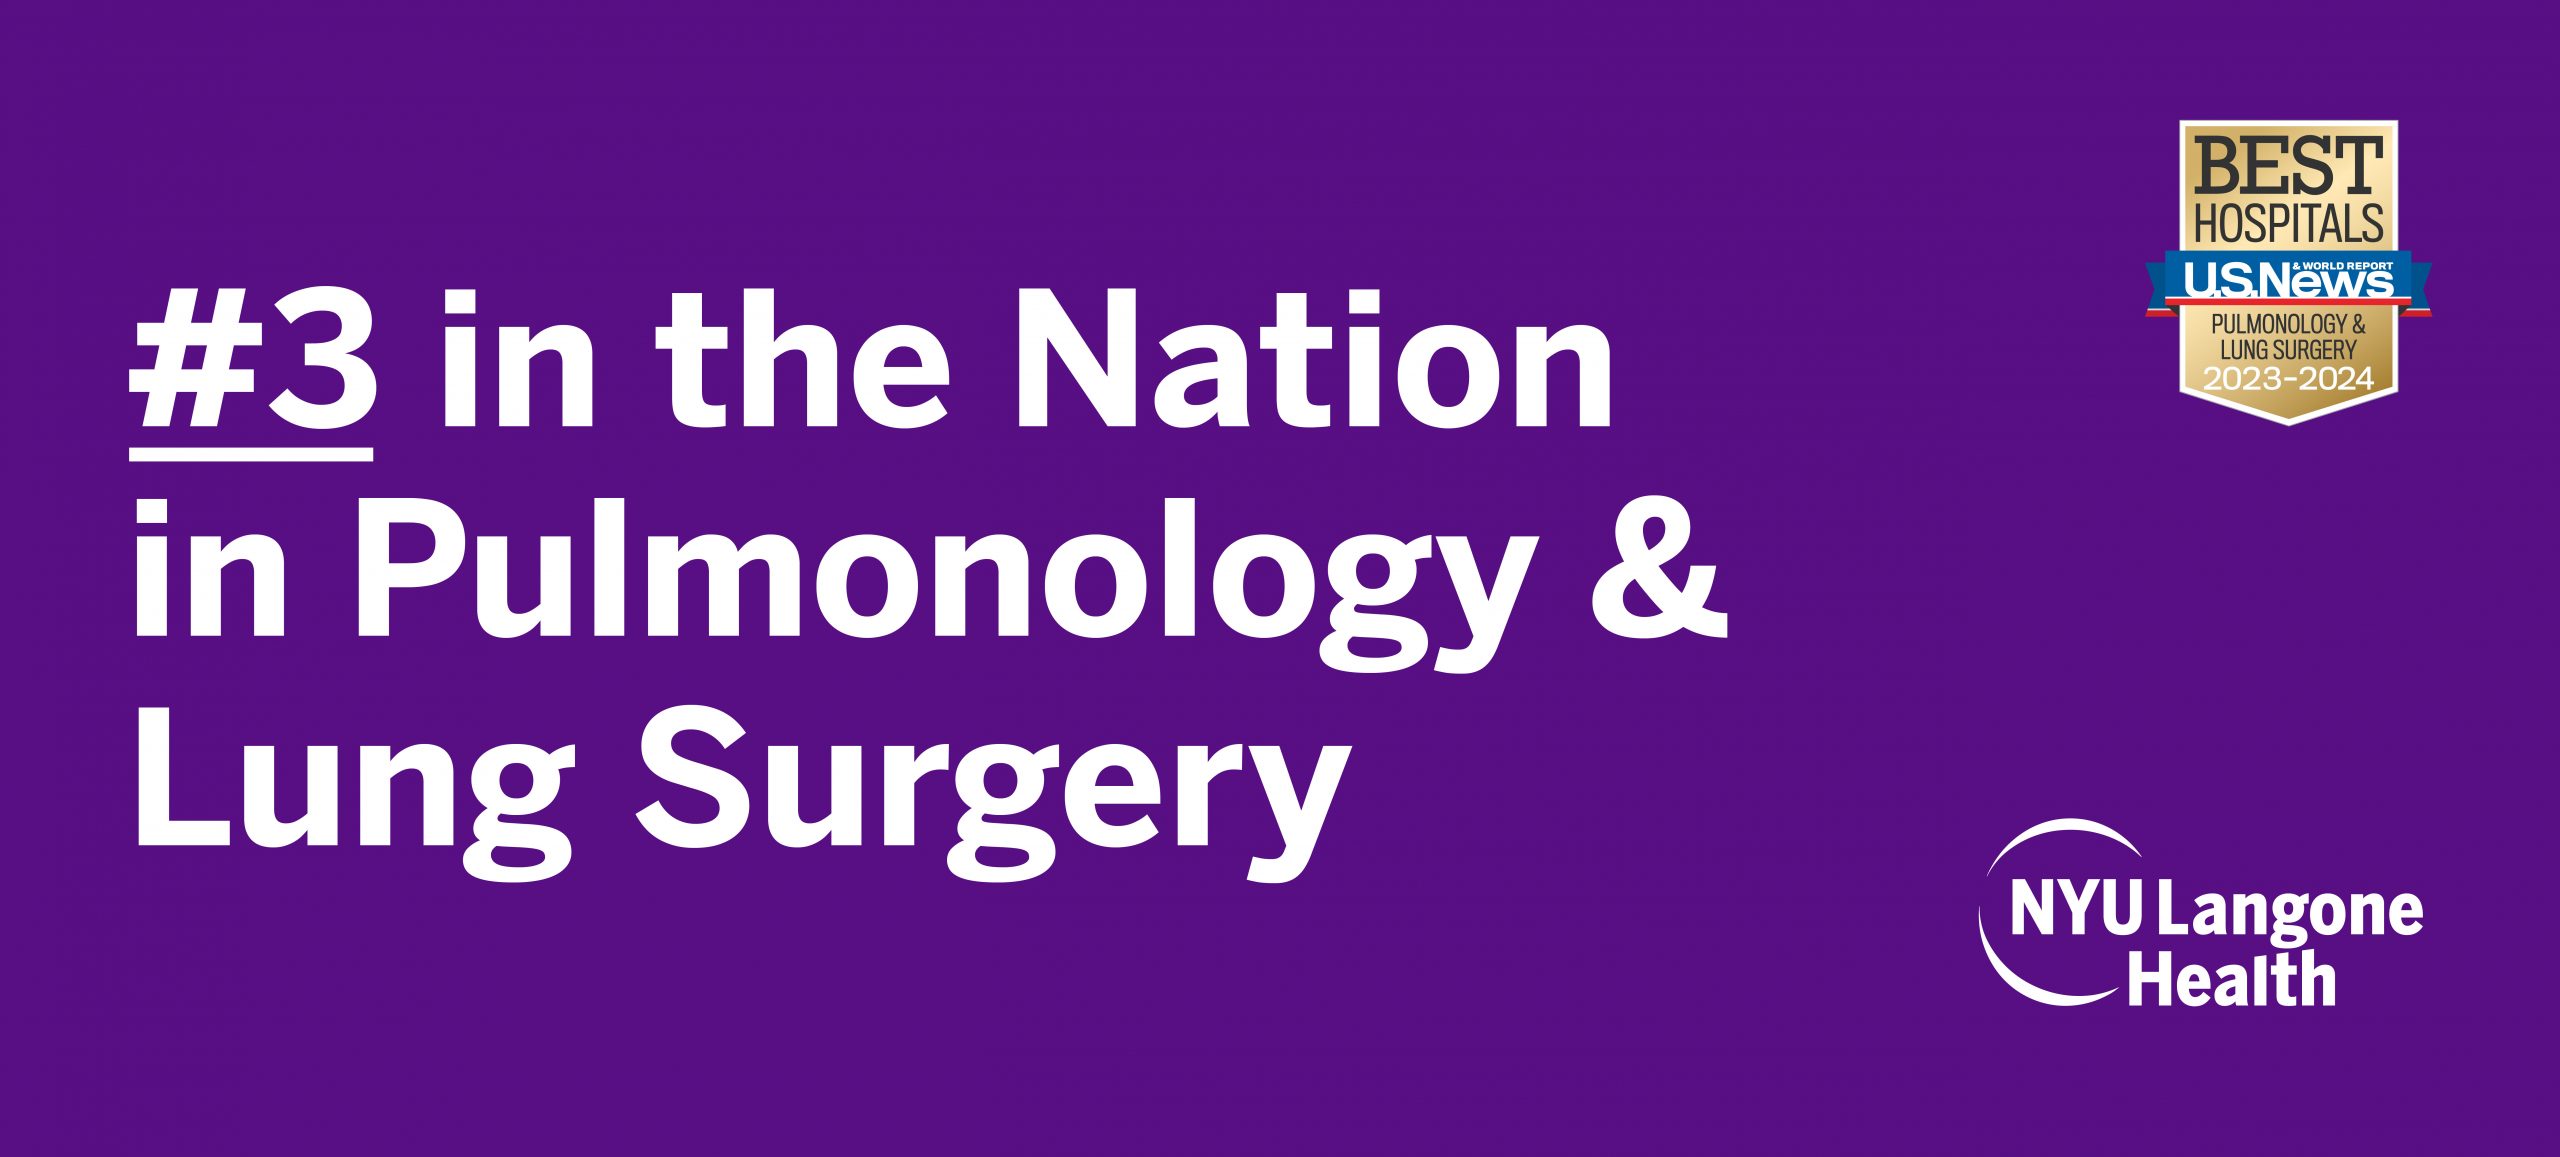 #3 in the Nation in Pulmonology & Lung Surgery 2023